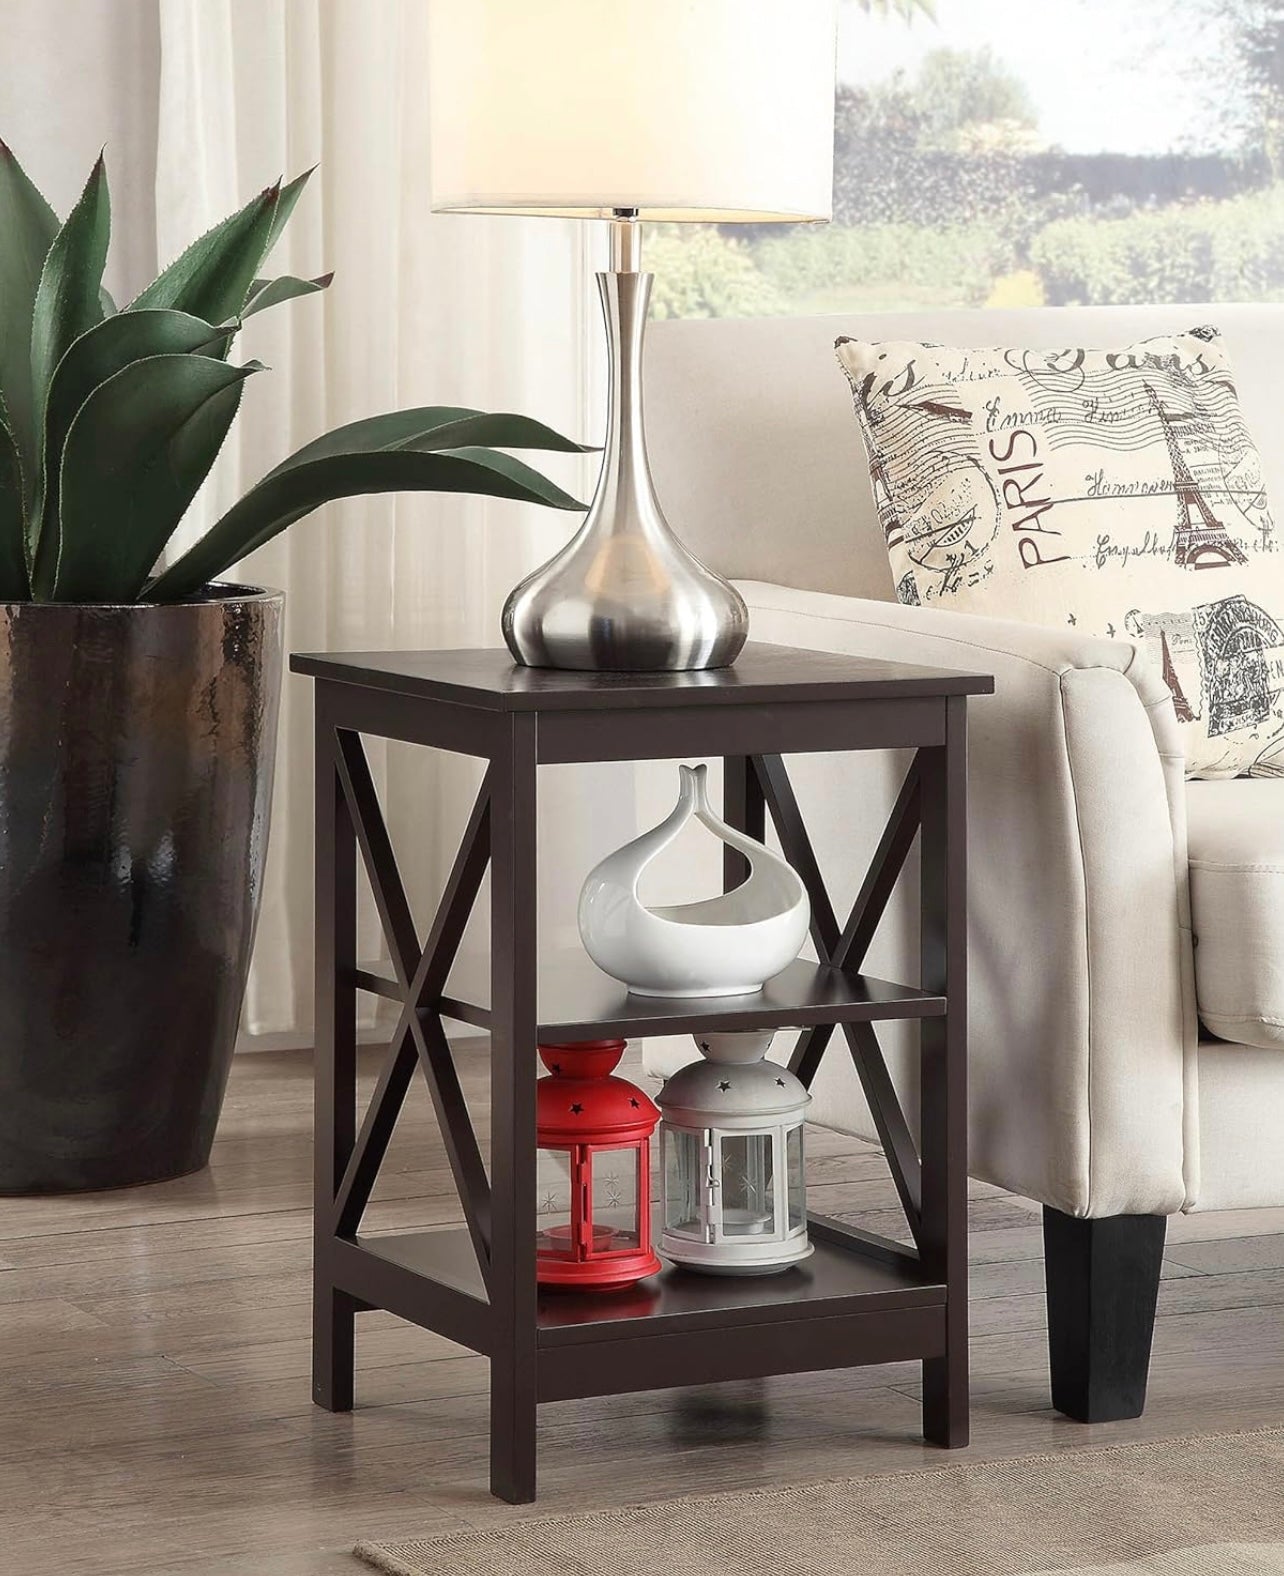 Svanetian End Table